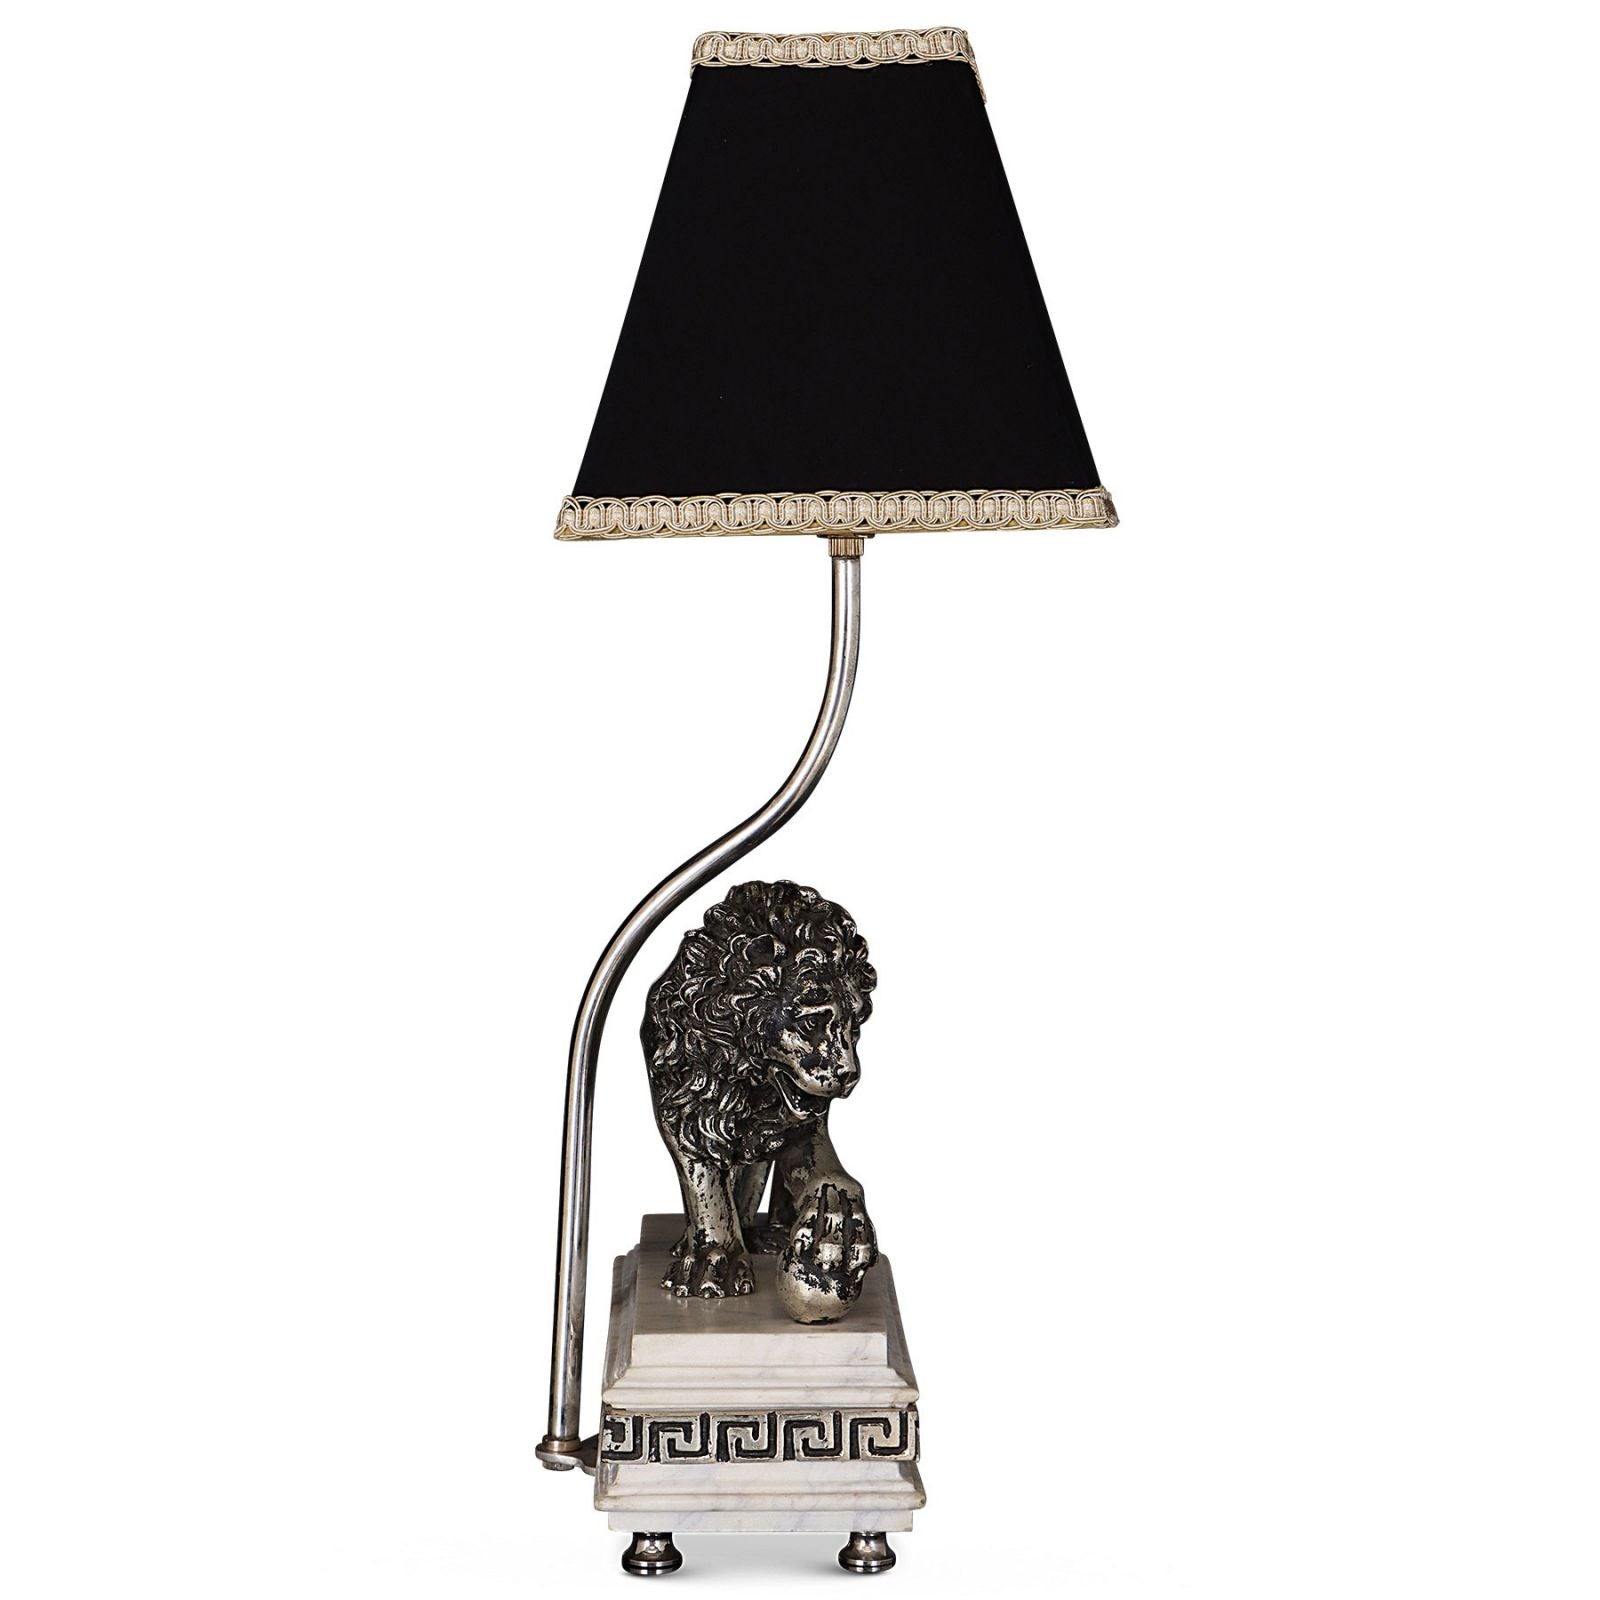 Silvered Athenian Lion Lamp on White Marble base